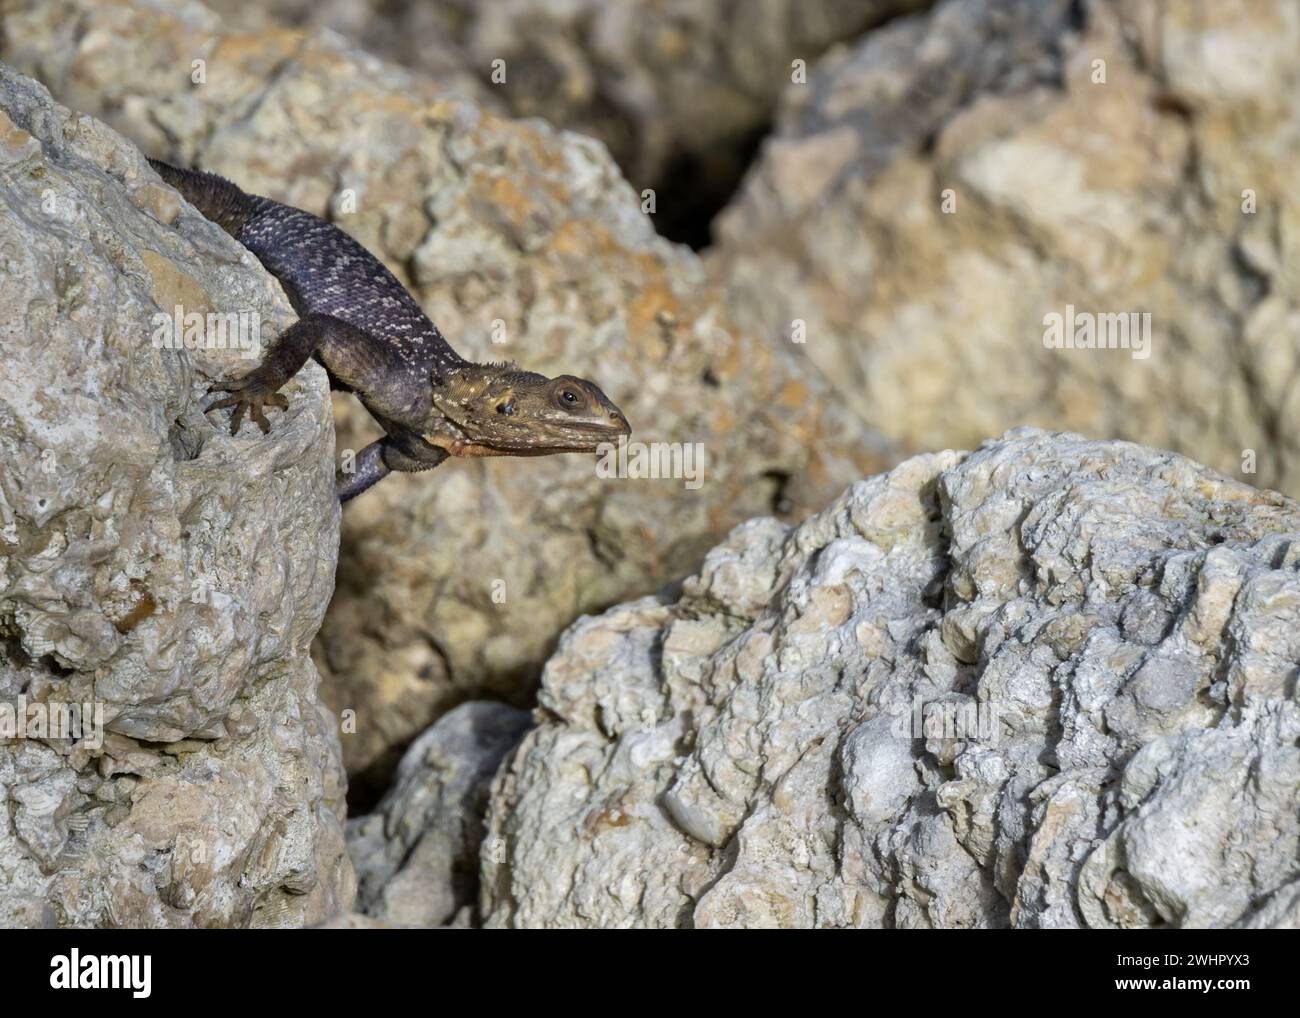 Agama (invasive) standing on a rock, Convoy Jetty Trail, Convoy Point, Biscayne National Park, Florida Stock Photo